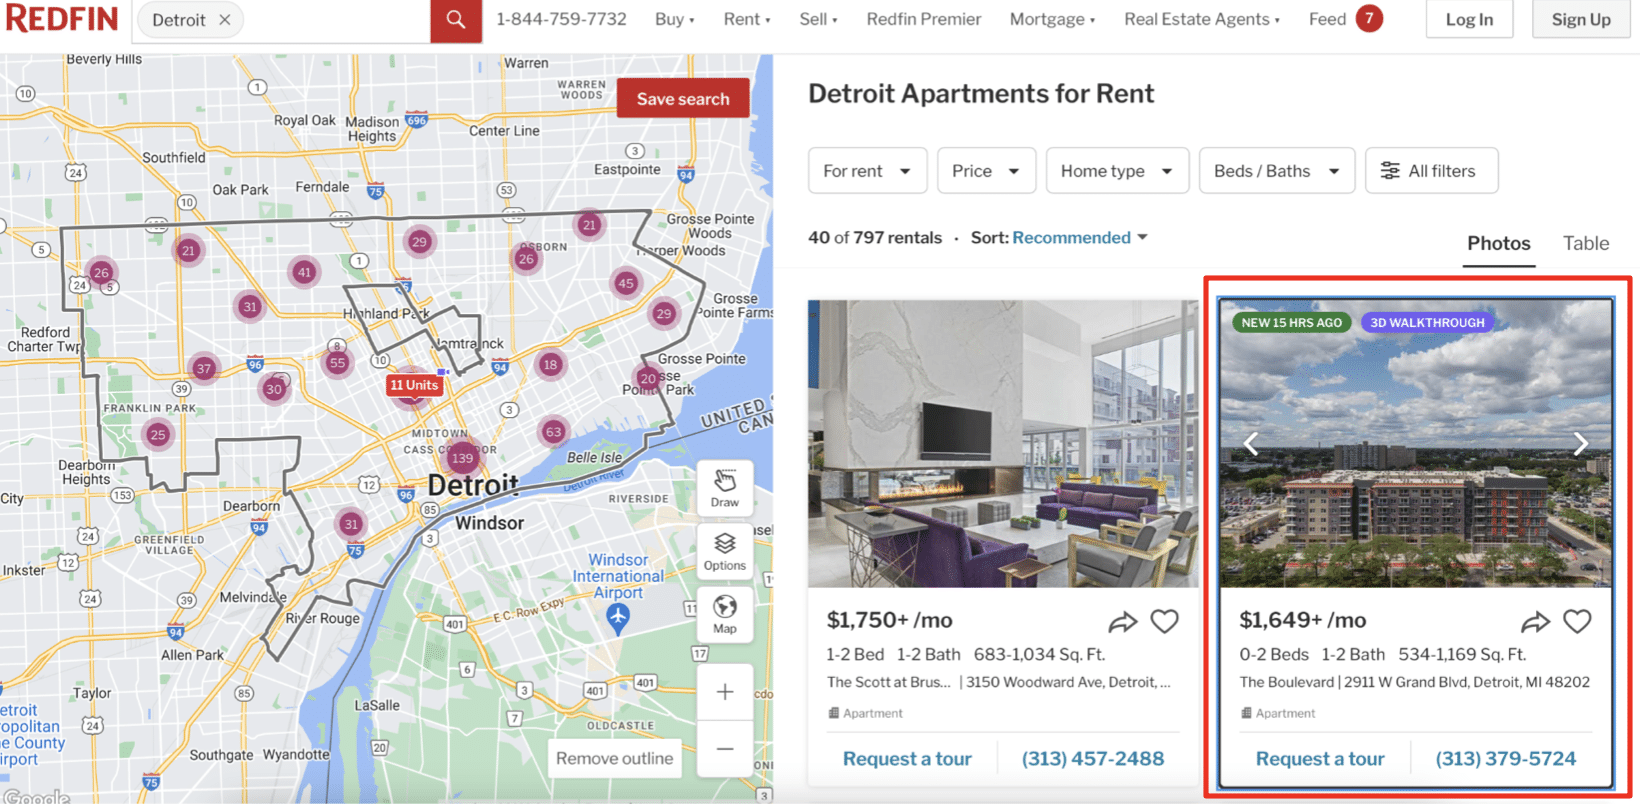 Search Results of Detroit Rentals in Redfin.